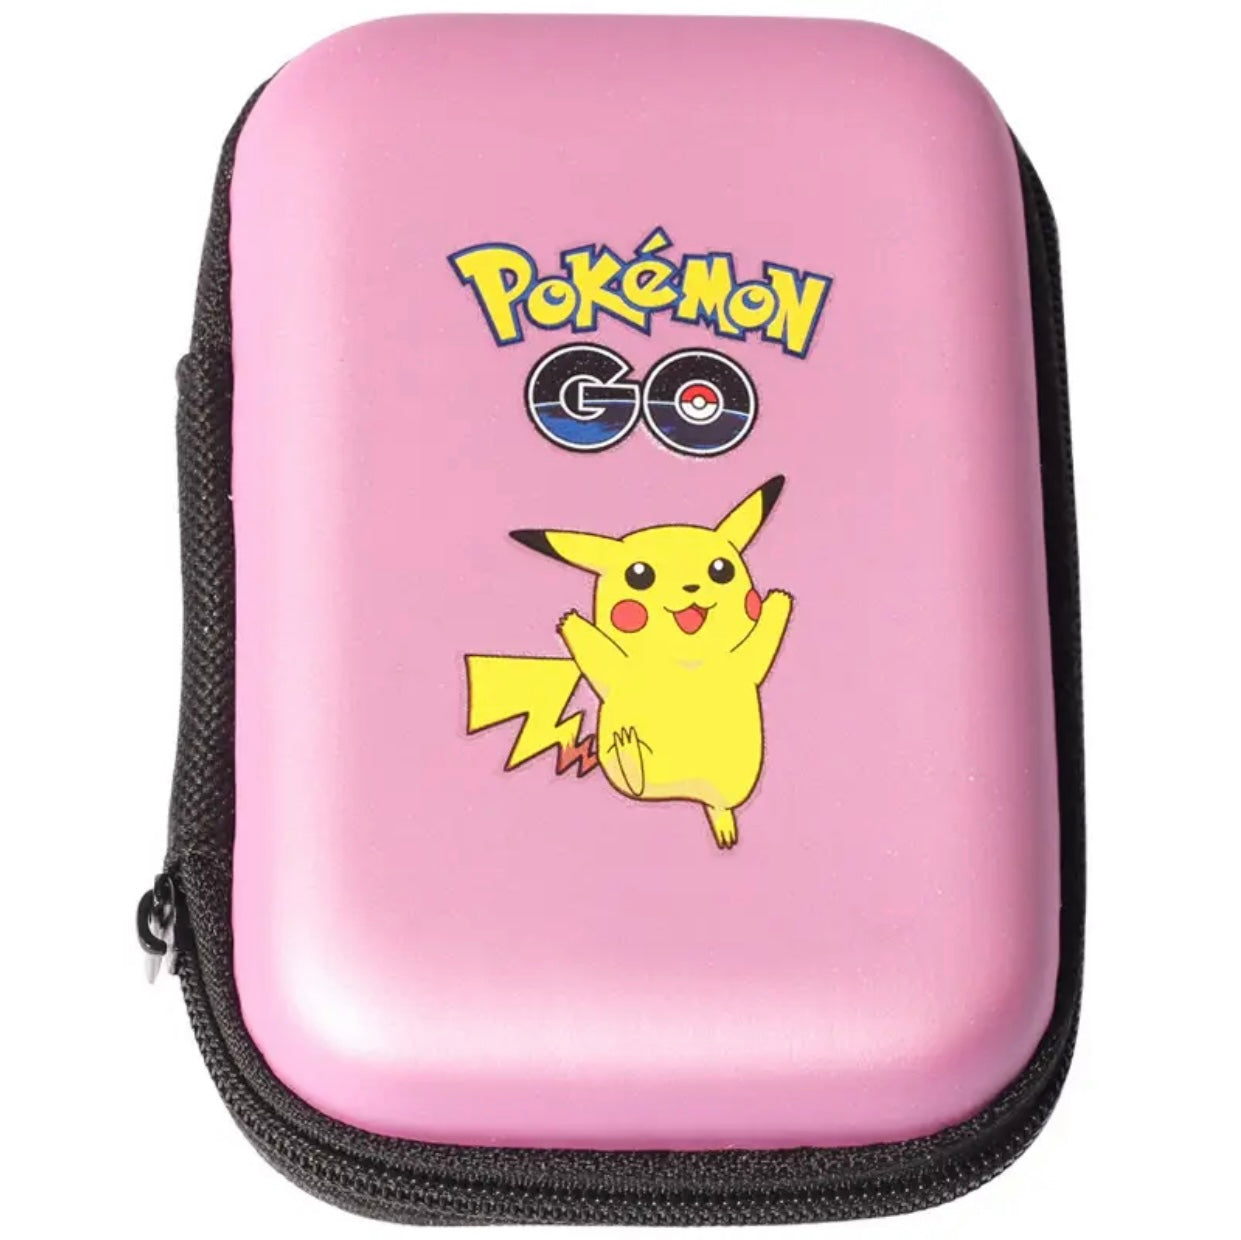 Pokémon Trading Card Case Hold up to 50 Cards